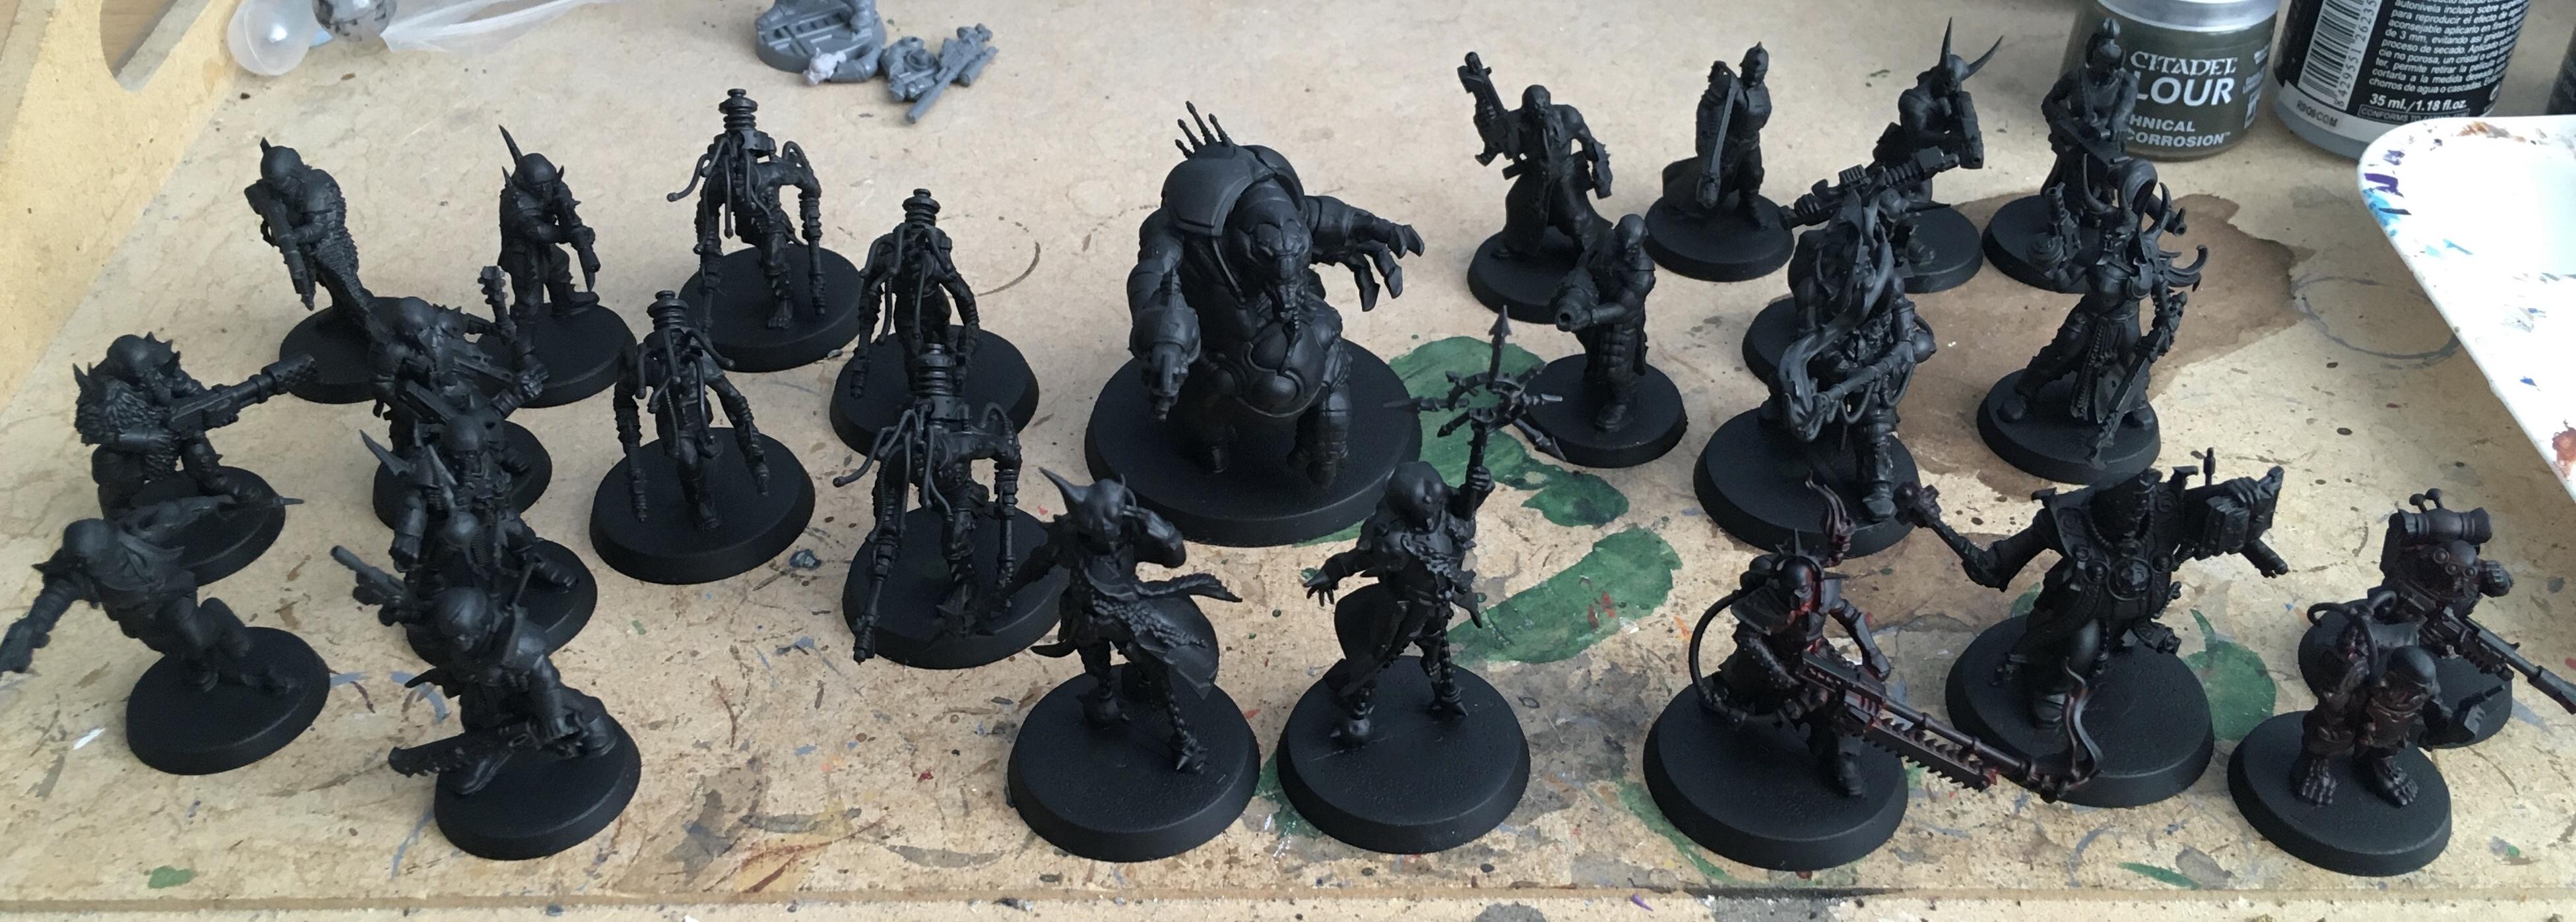 Black Stone Fortress, Chaos, Cultists, Rogue Psykers, Traitor Guardsmen, Zoat